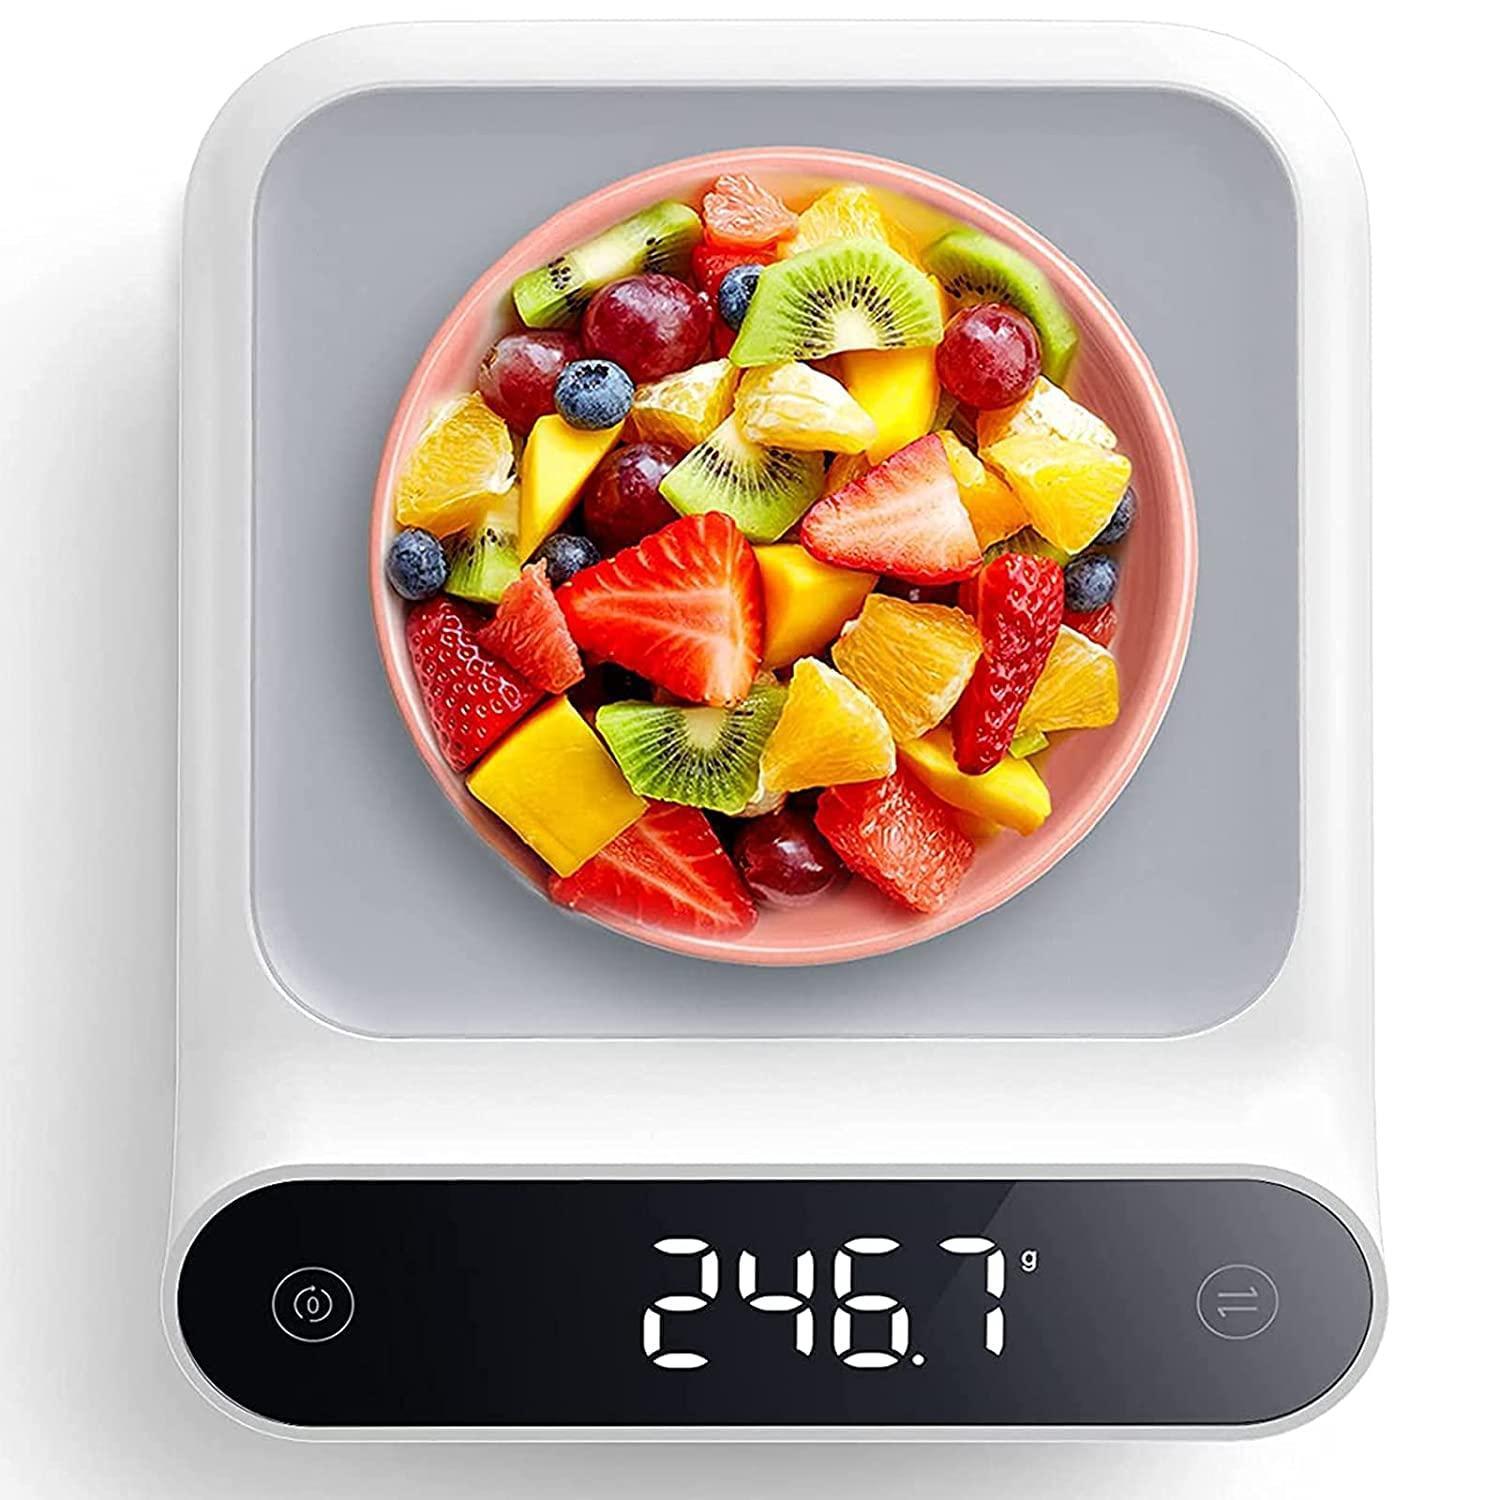 Digital Kitchen Scale, Electronic High Precision Scale Weight Up to 5 kg (Precision 1g) - Multifunct